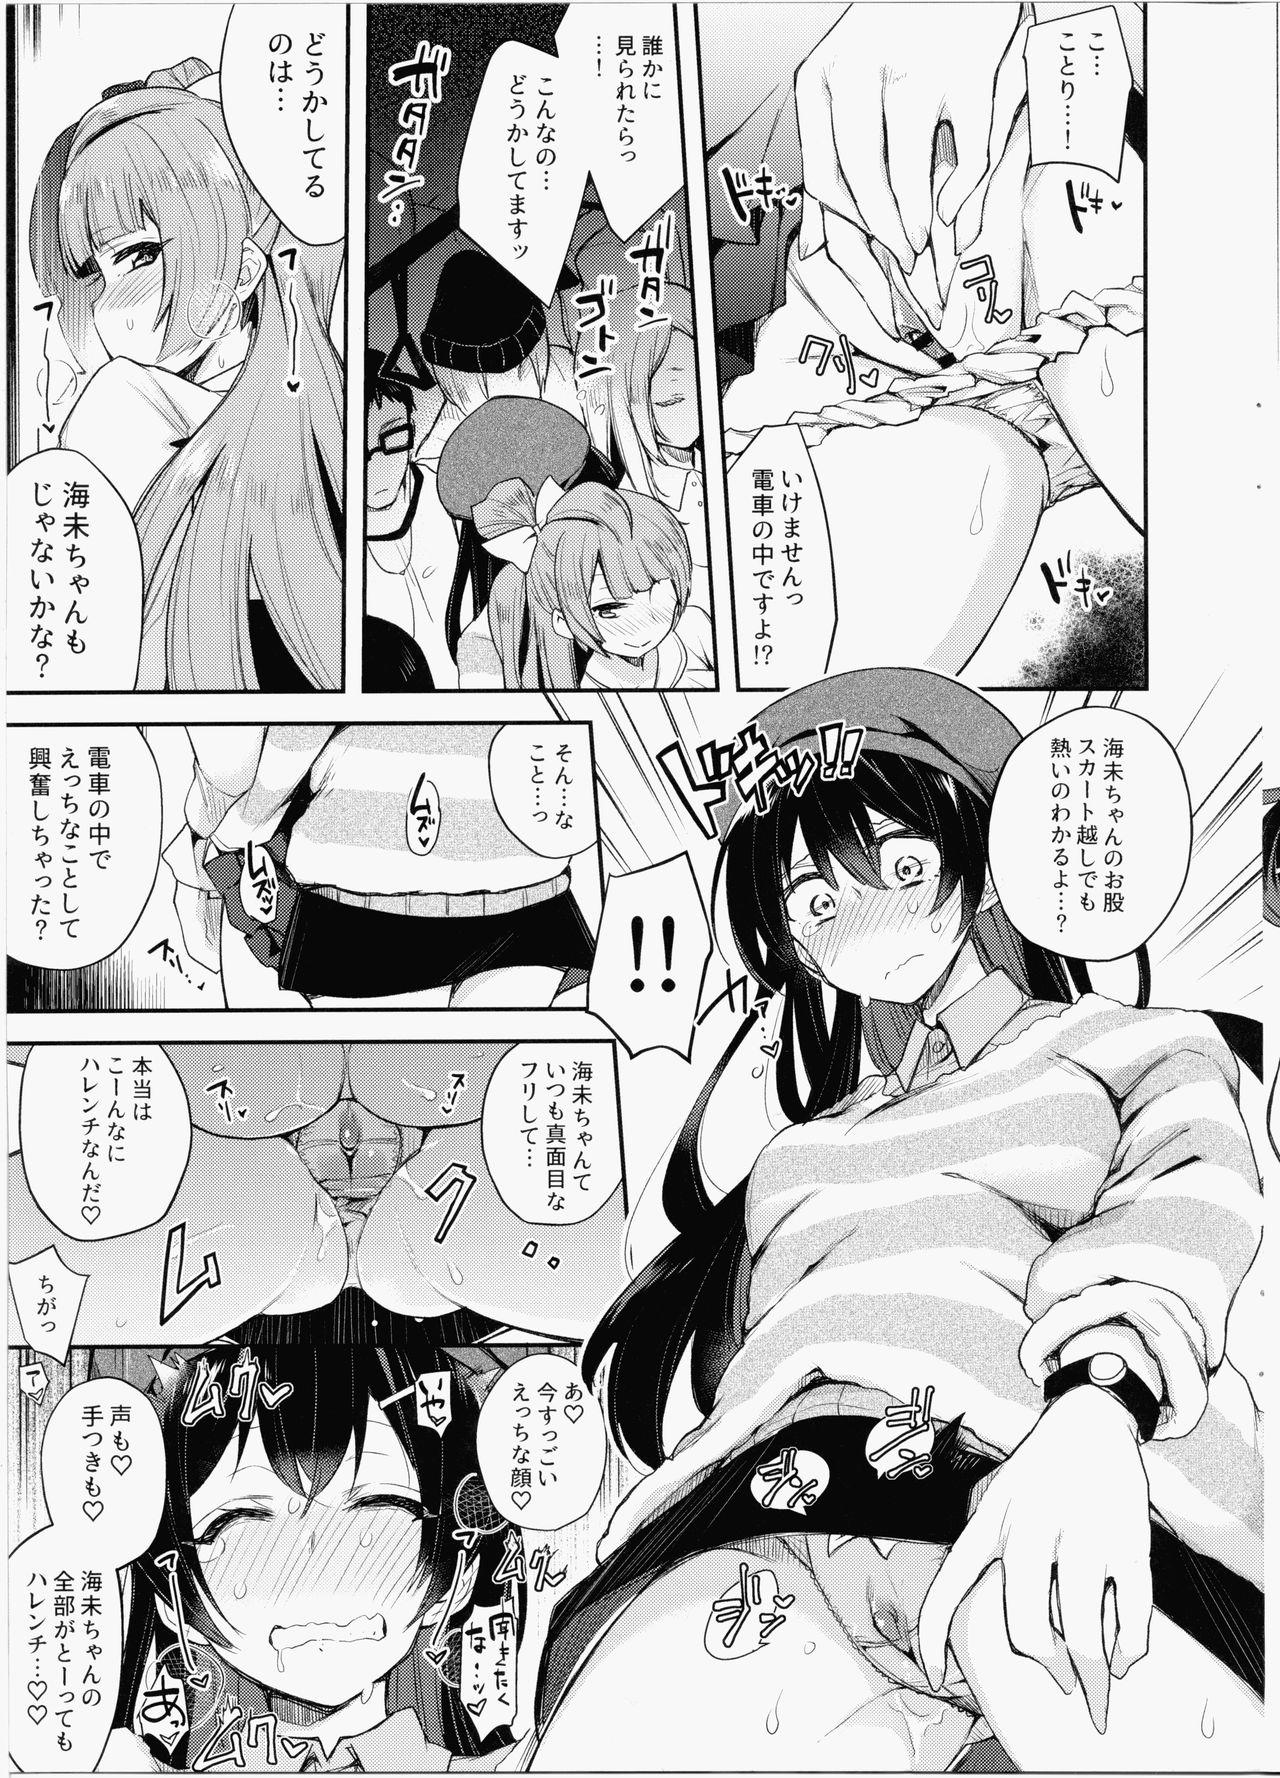 Blackmail Sweet & Love Arrow - Love live Interracial Sex - Page 8